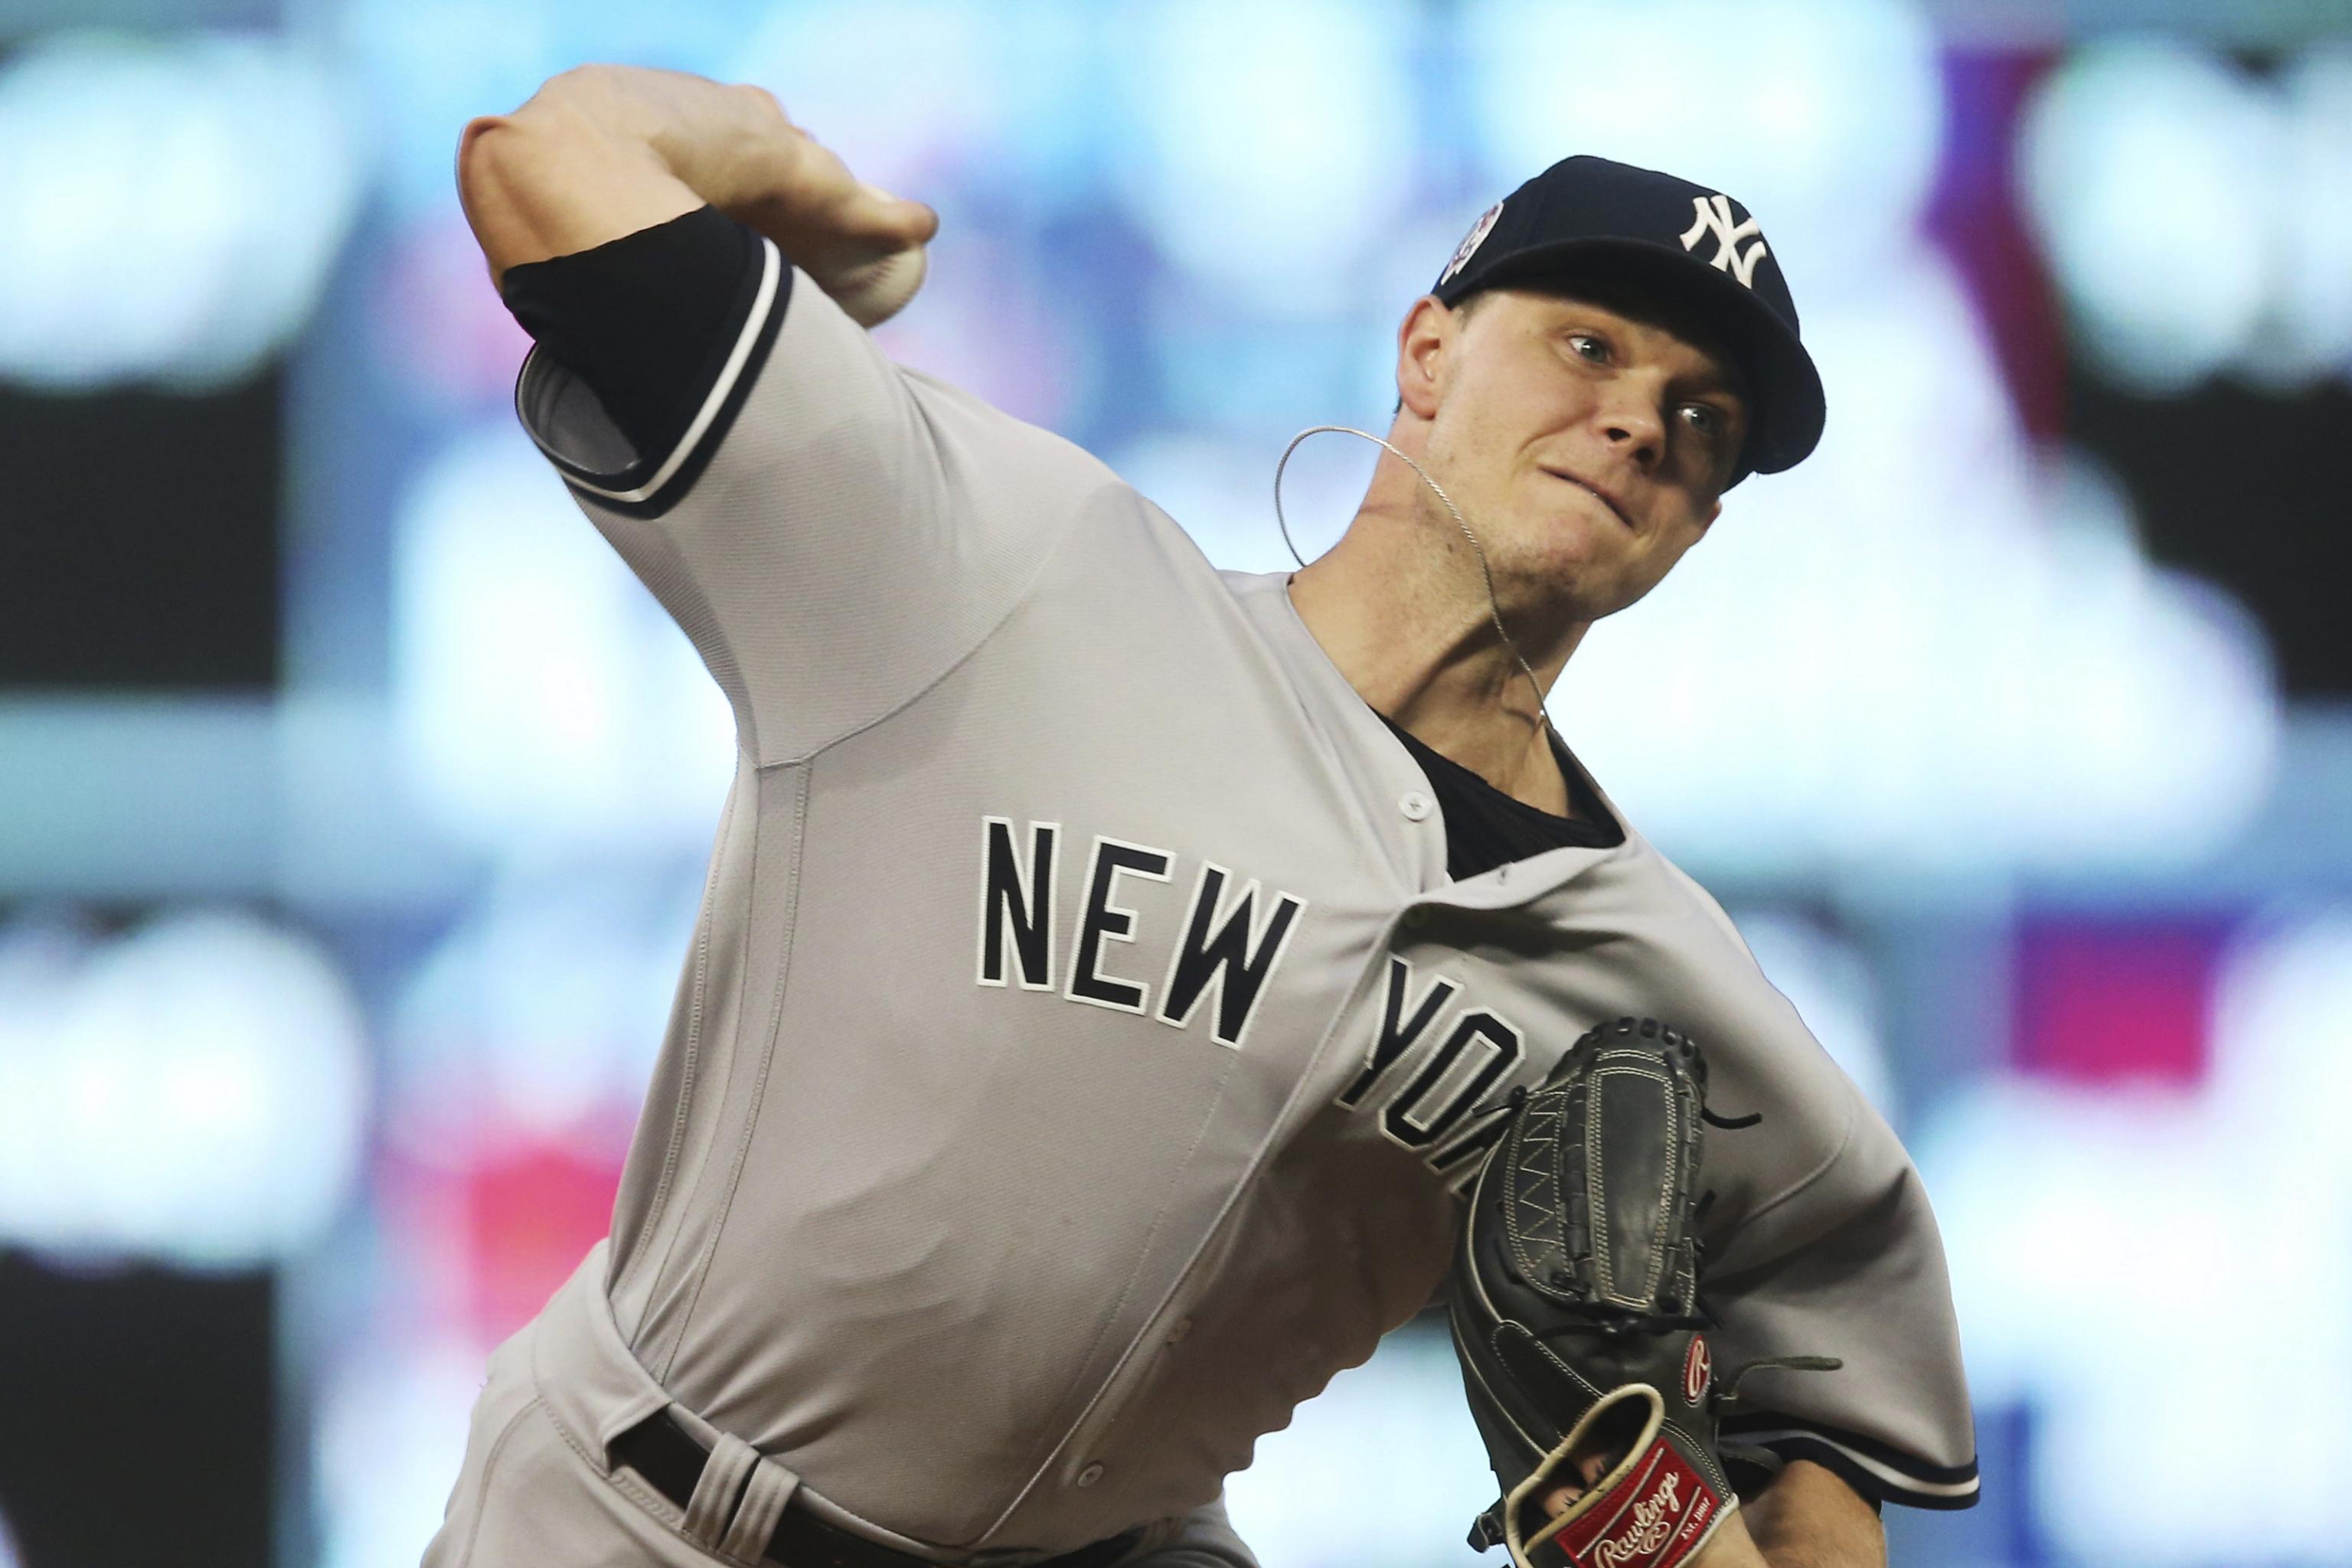 First look at Sonny Gray in Yankee pinstripes